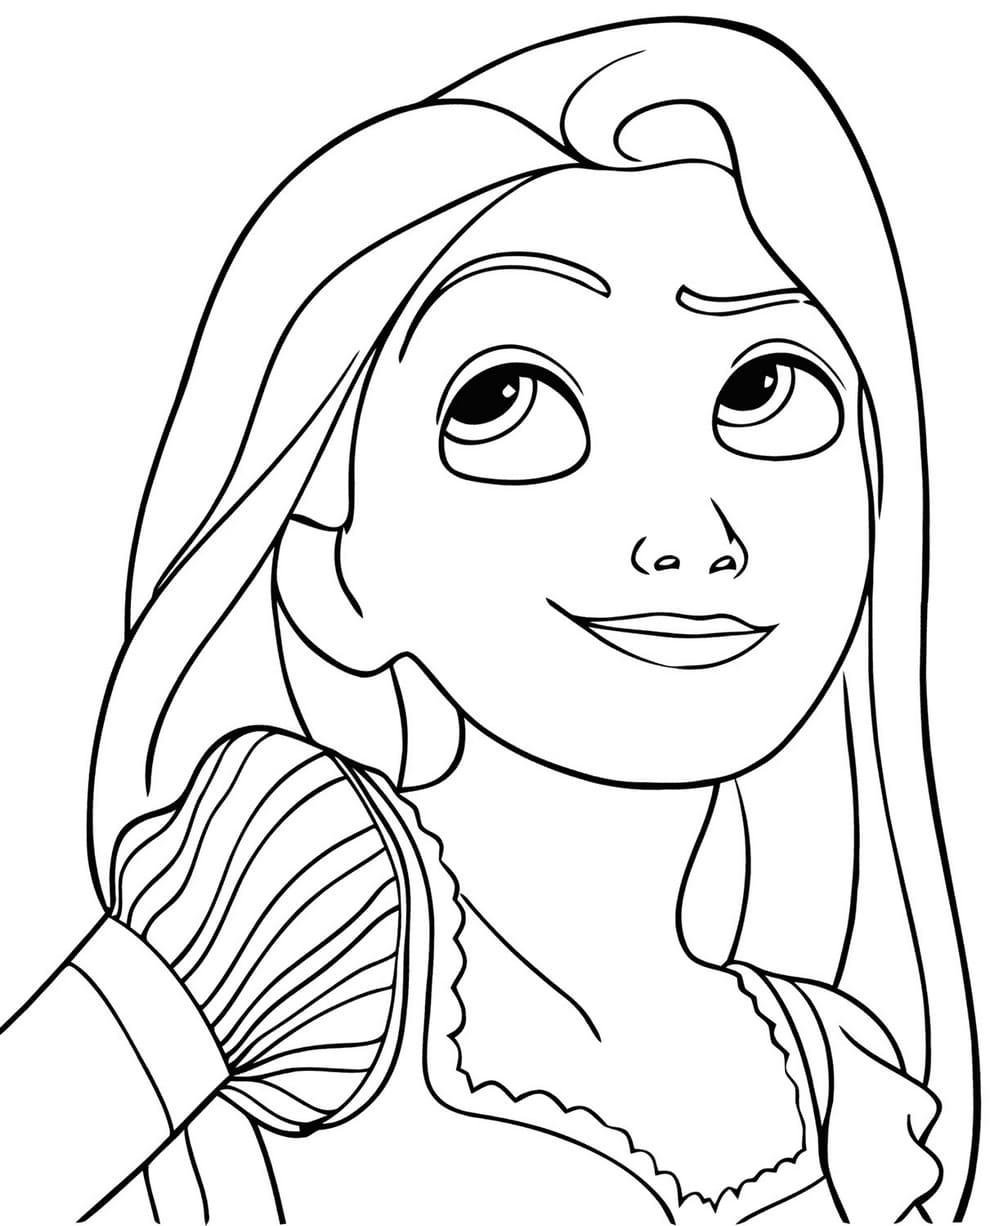 Rapunzel Printable coloring pages WONDER DAY — Coloring pages for